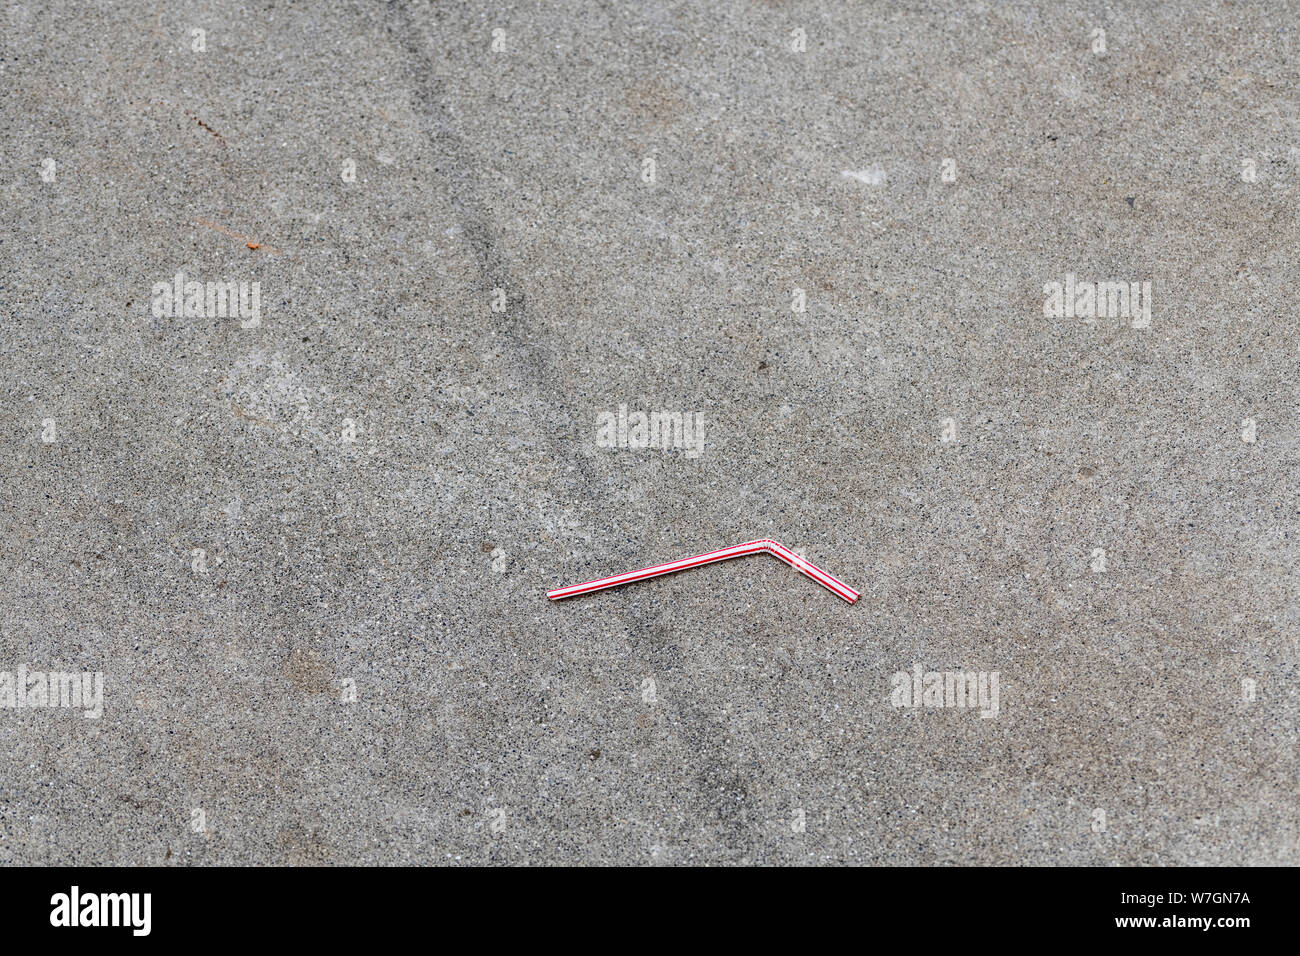 Plastic drinking straw discarded on cement paving surface in urban area. Metaphor plastic straw pollution, environmental pollution, plastic straw ban. Stock Photo